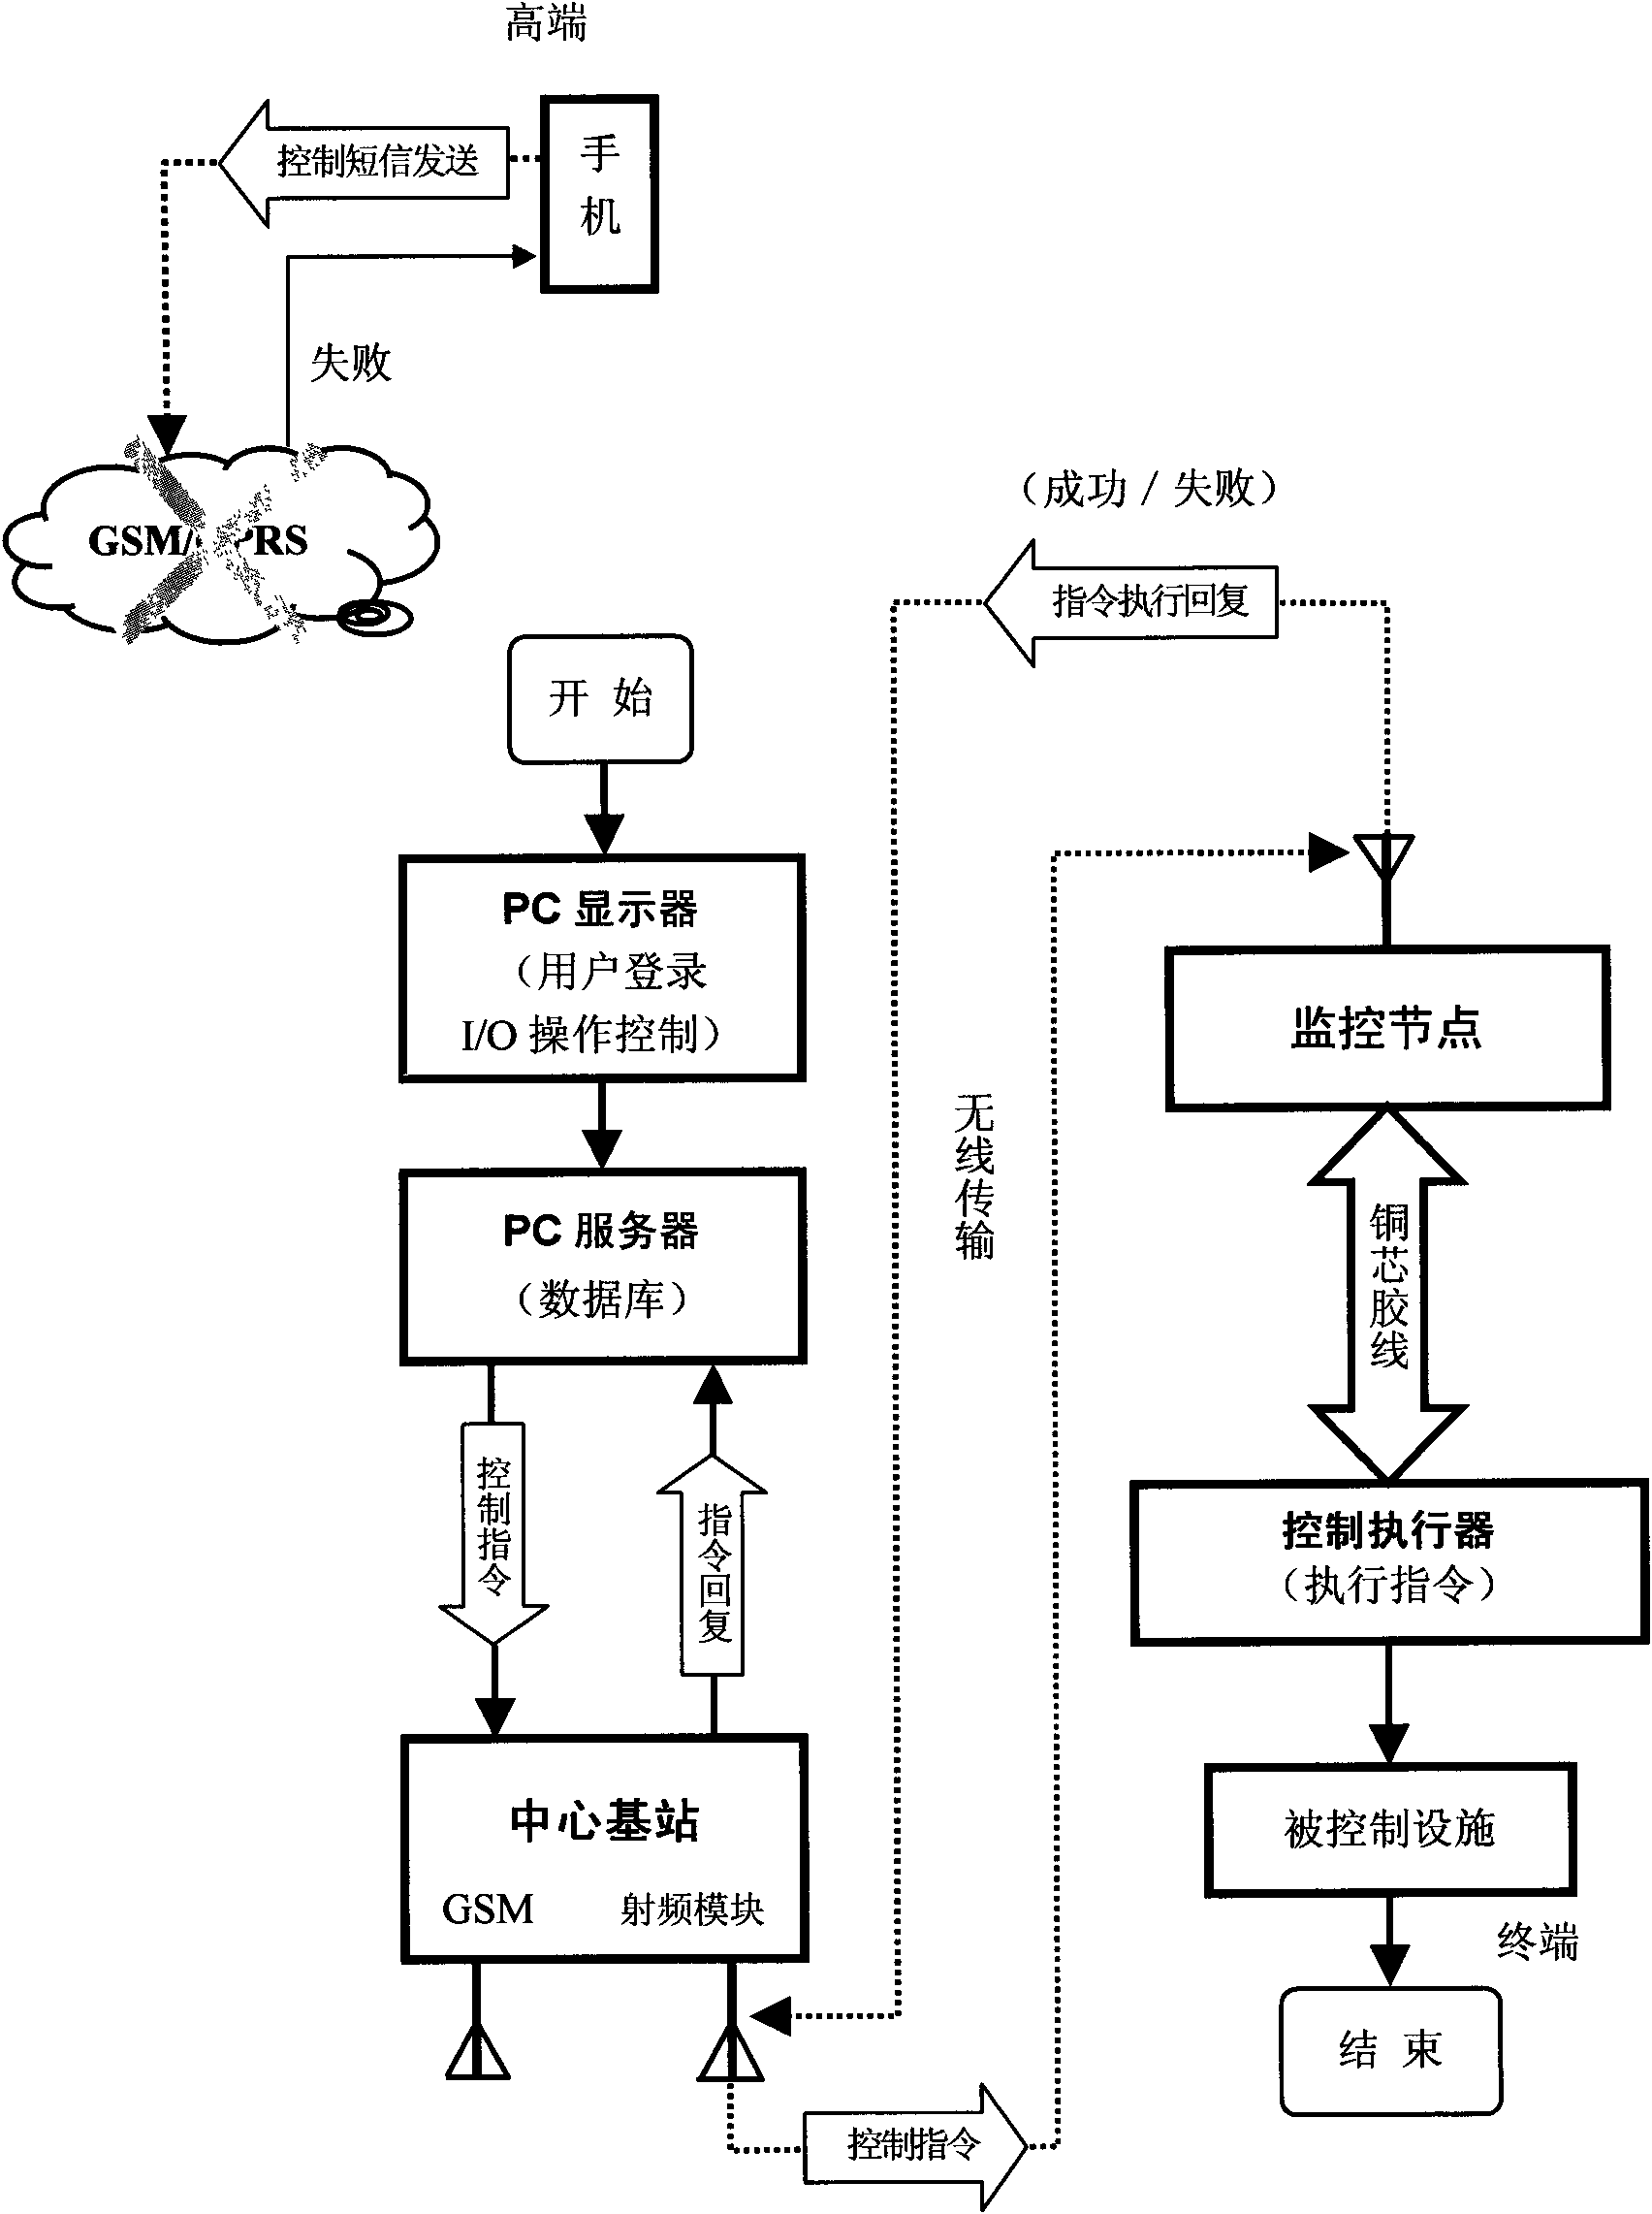 Data transmission and remote control method for self-organizing wireless internet of things (IoT) system